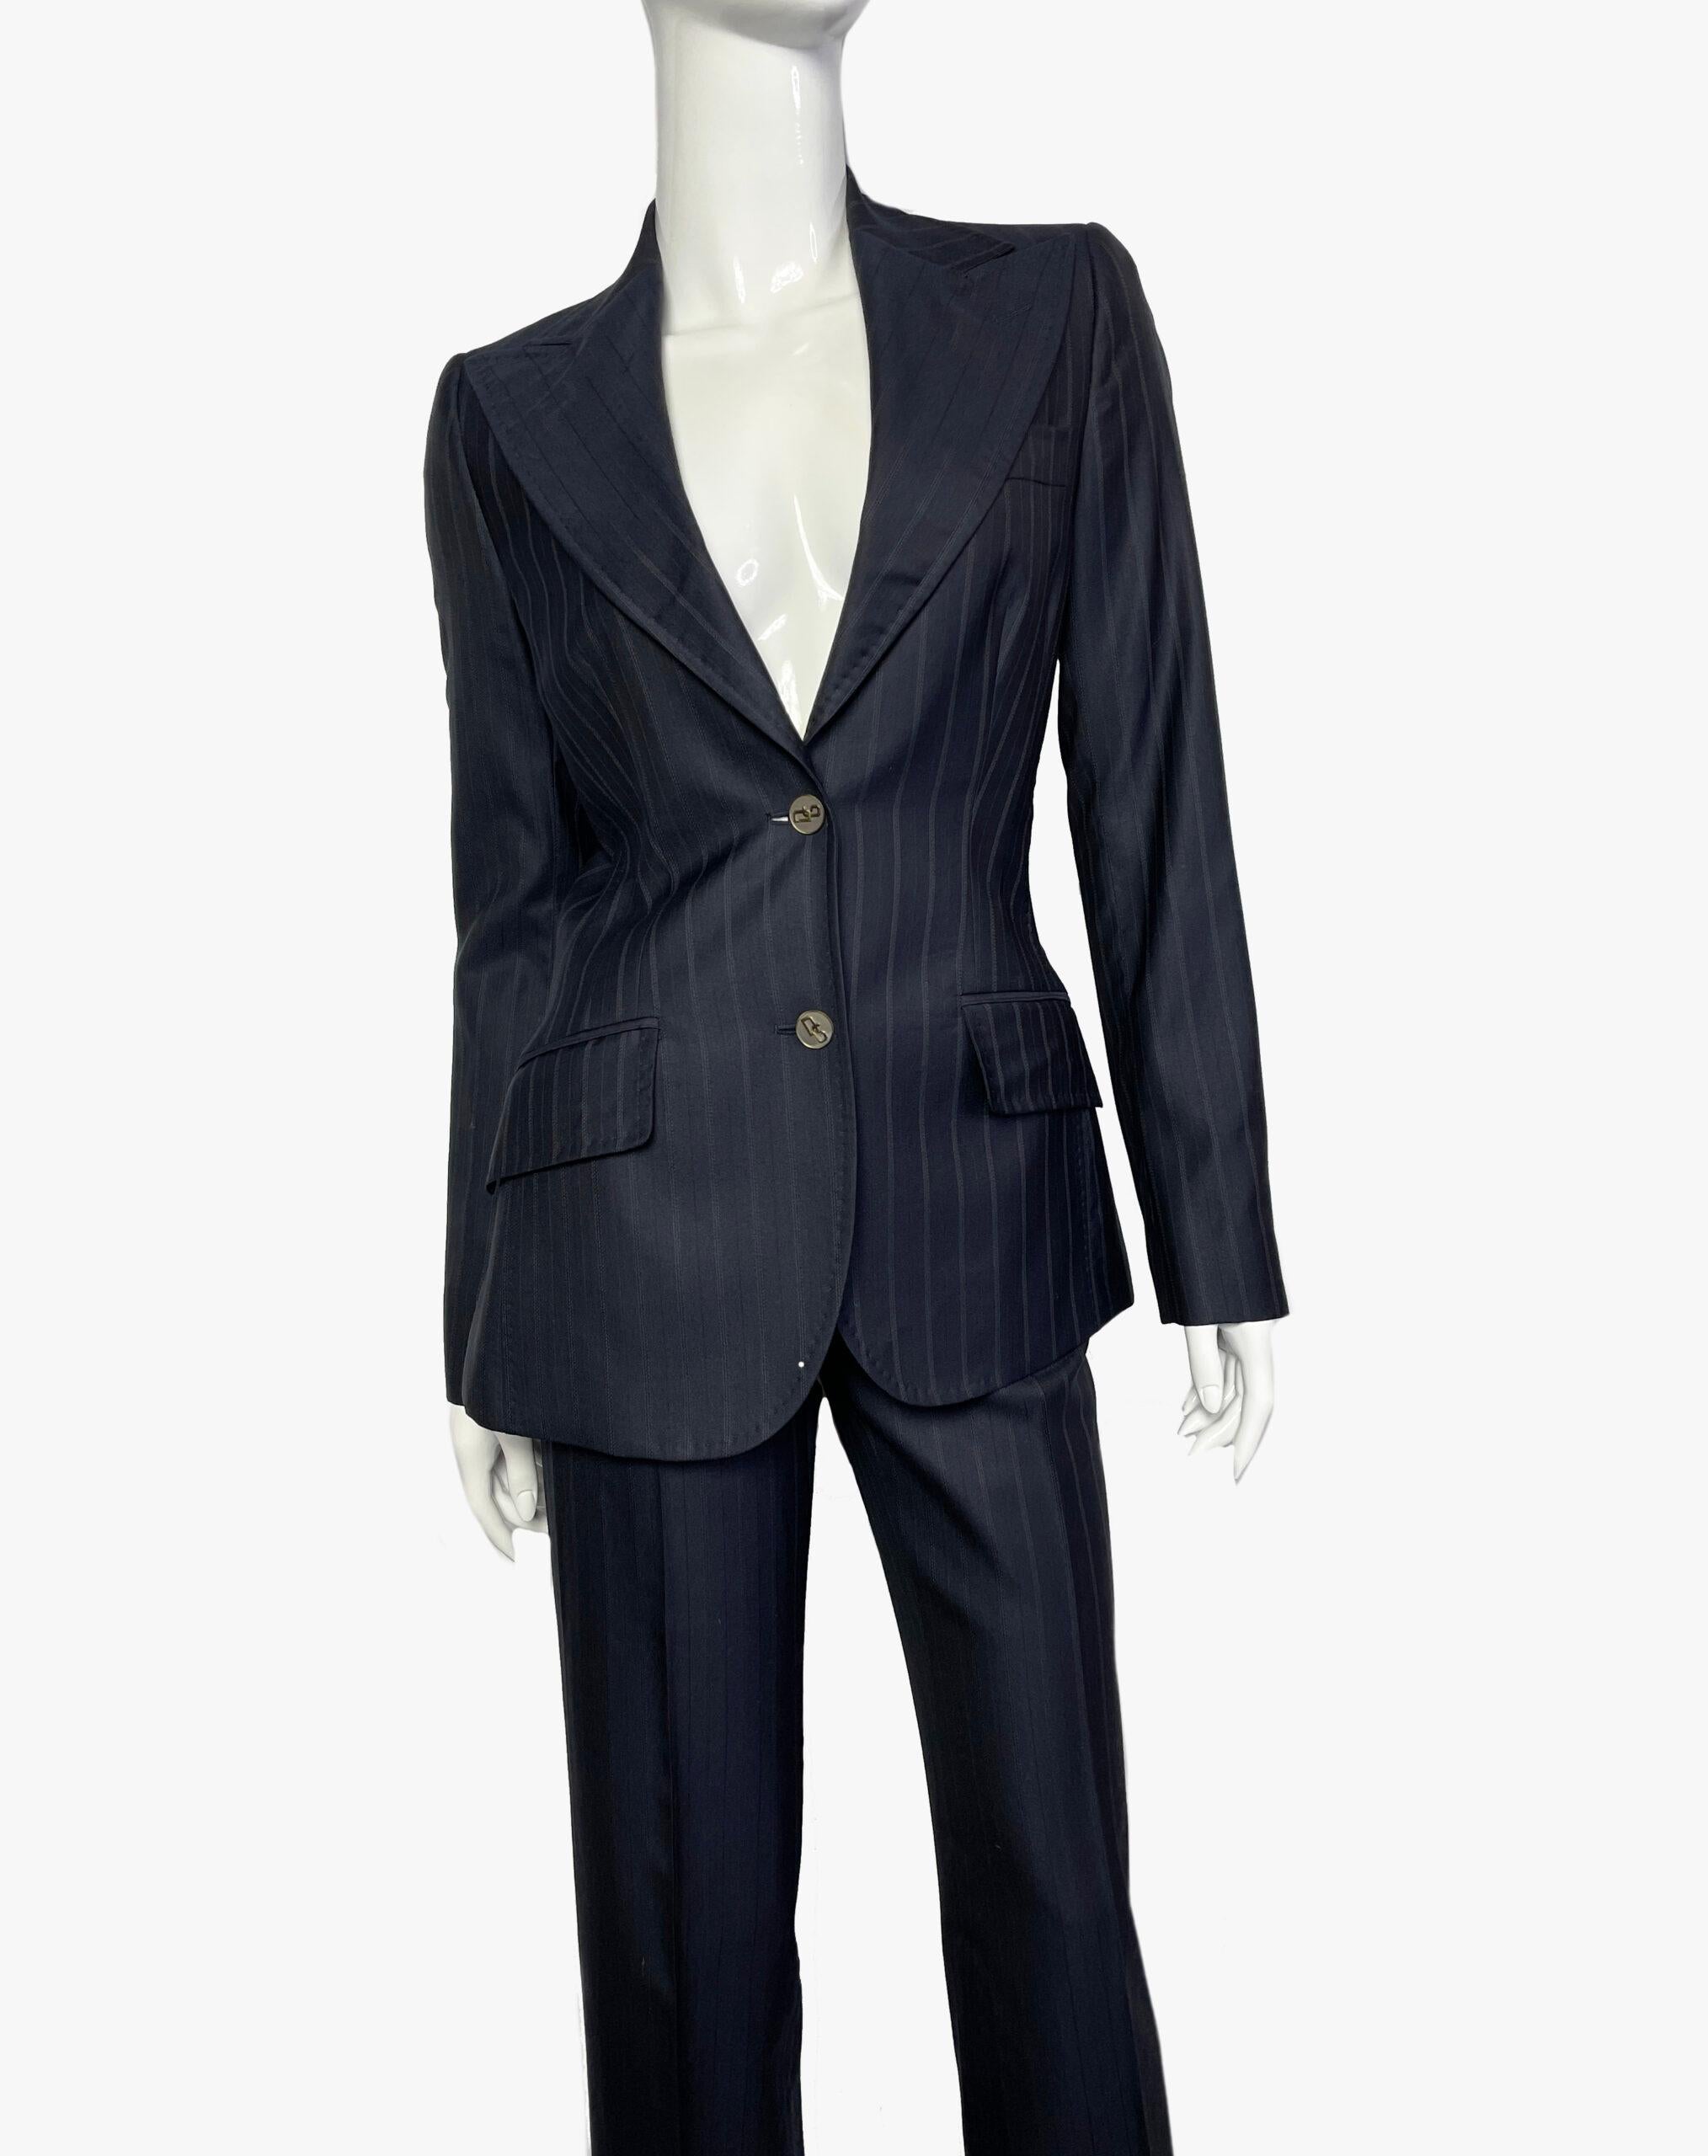 Trouser suit in fine wool and silk, perfect fit and cut. Dark blue color with pinstripe print. The jacket has two pockets and fastens with buttons. A row of buttons on the sleeve. Fully lined. 
Trousers are straight, there are loops for a belt.